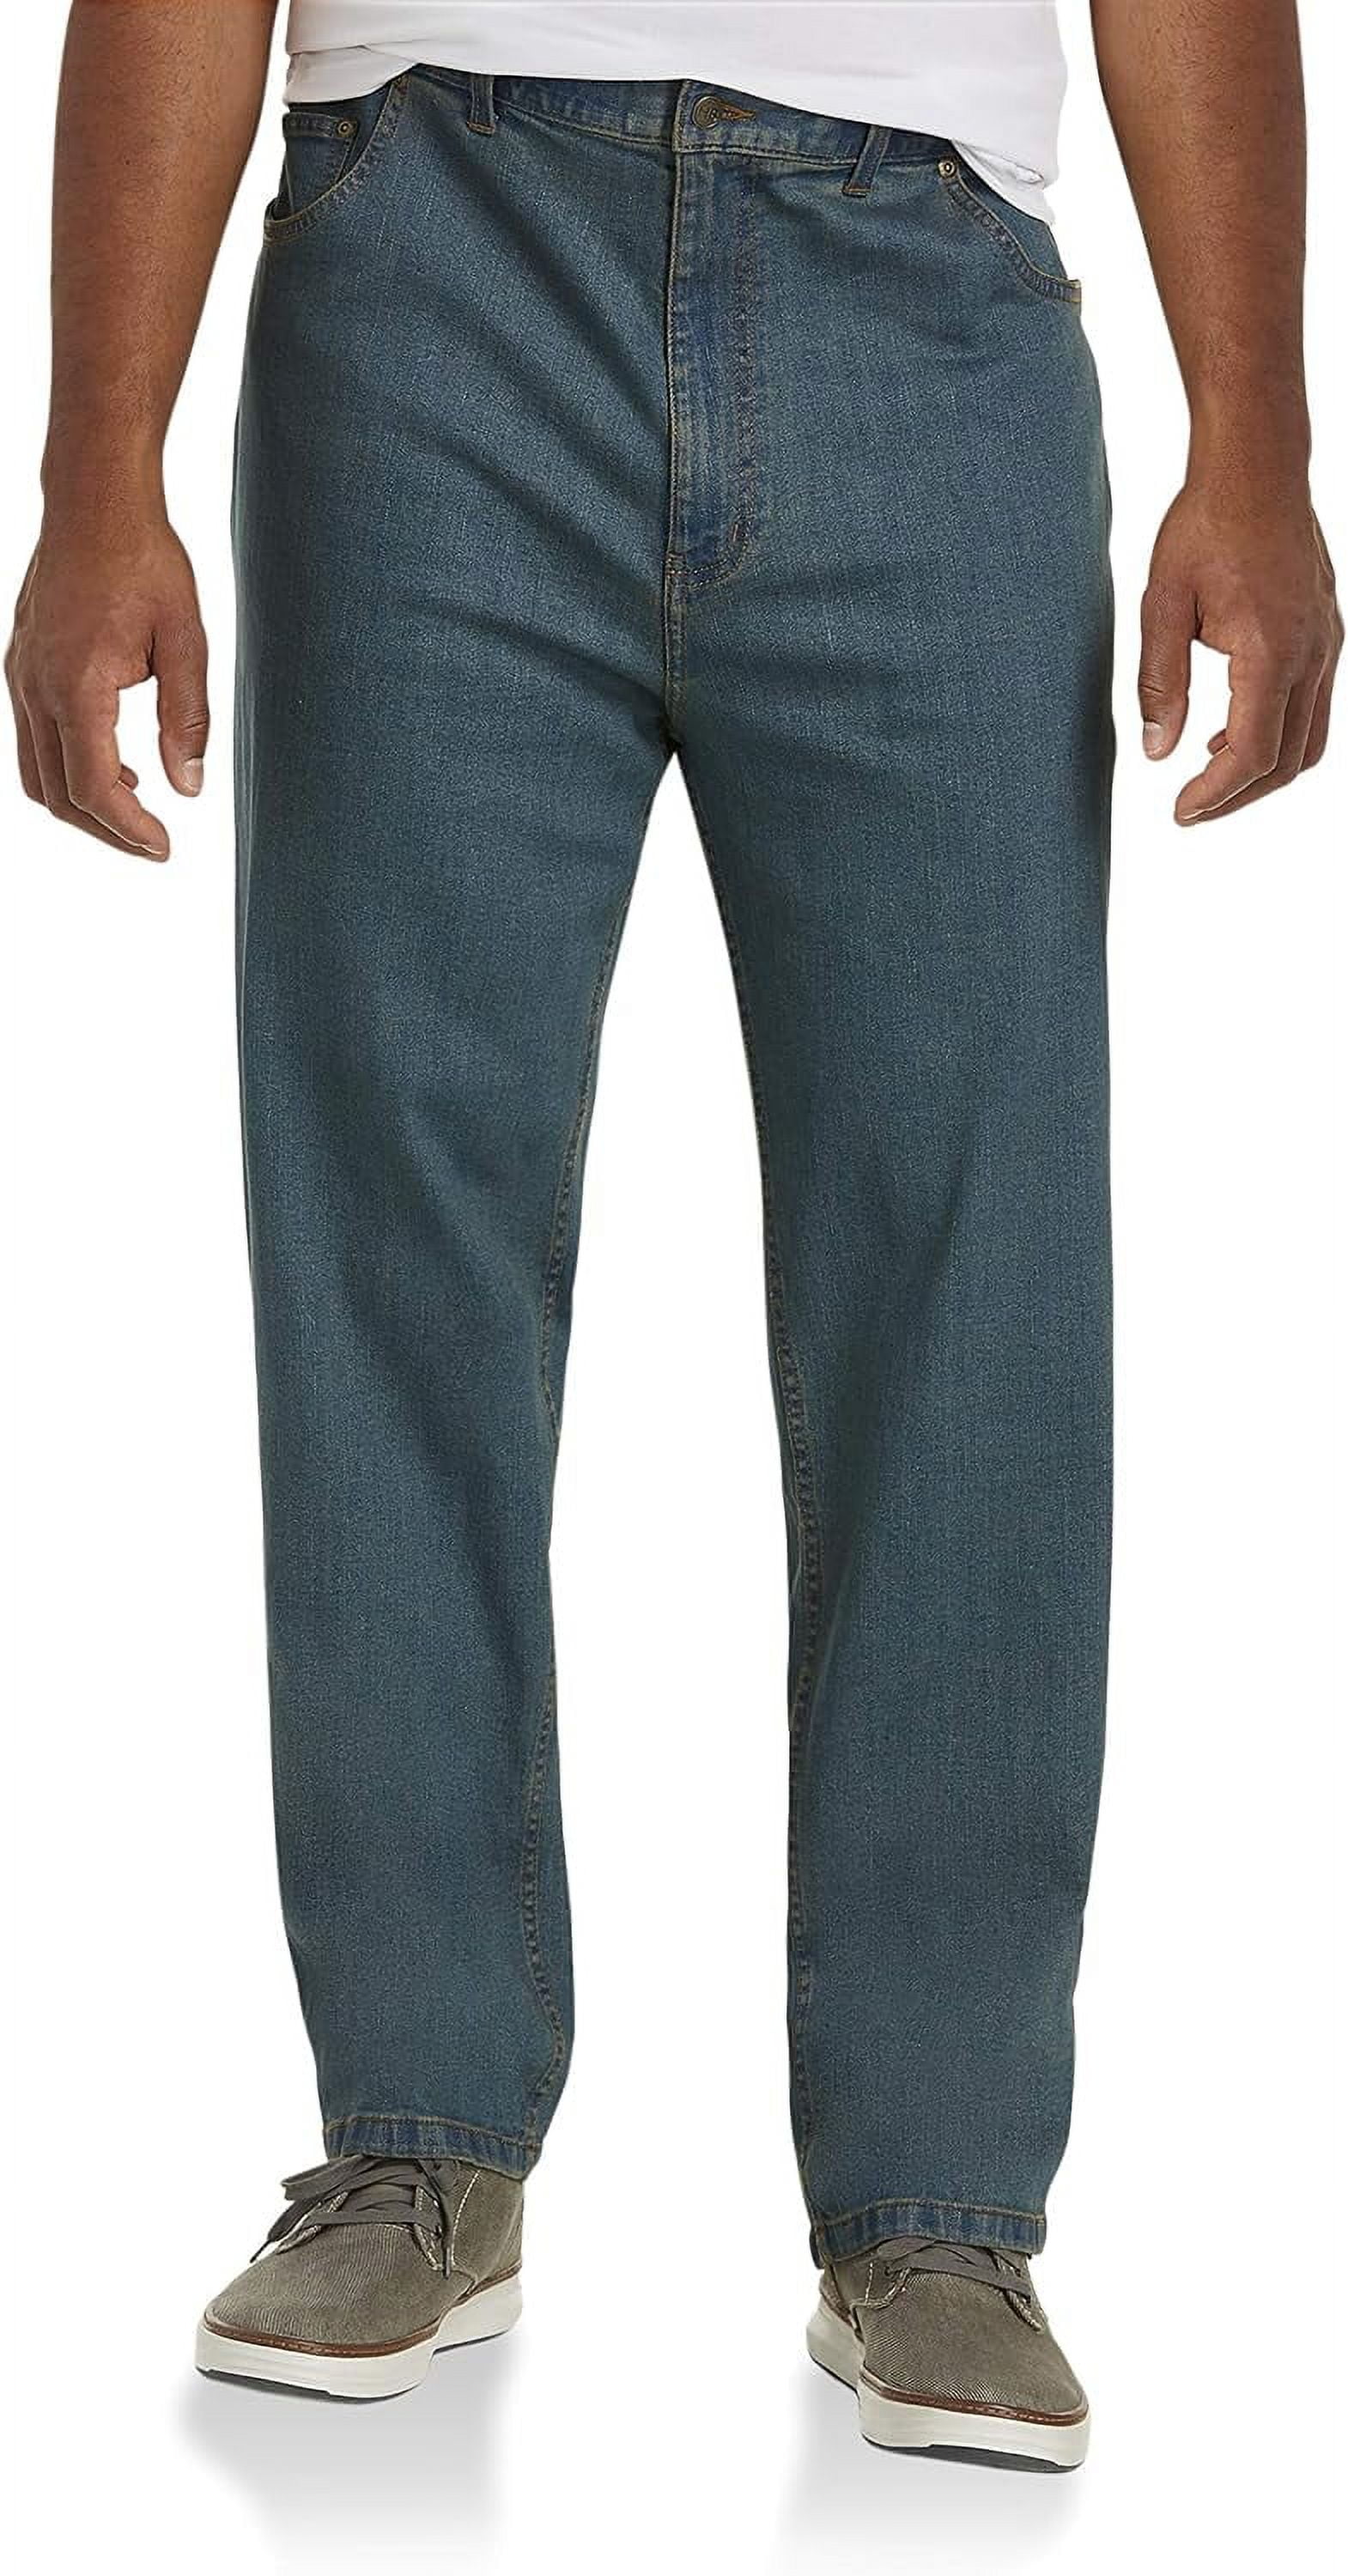 Harbor Bay by DXL Men's Big and Tall Continuous Comfort Stretch Jeans, Dirty Wash, 58W X 28L